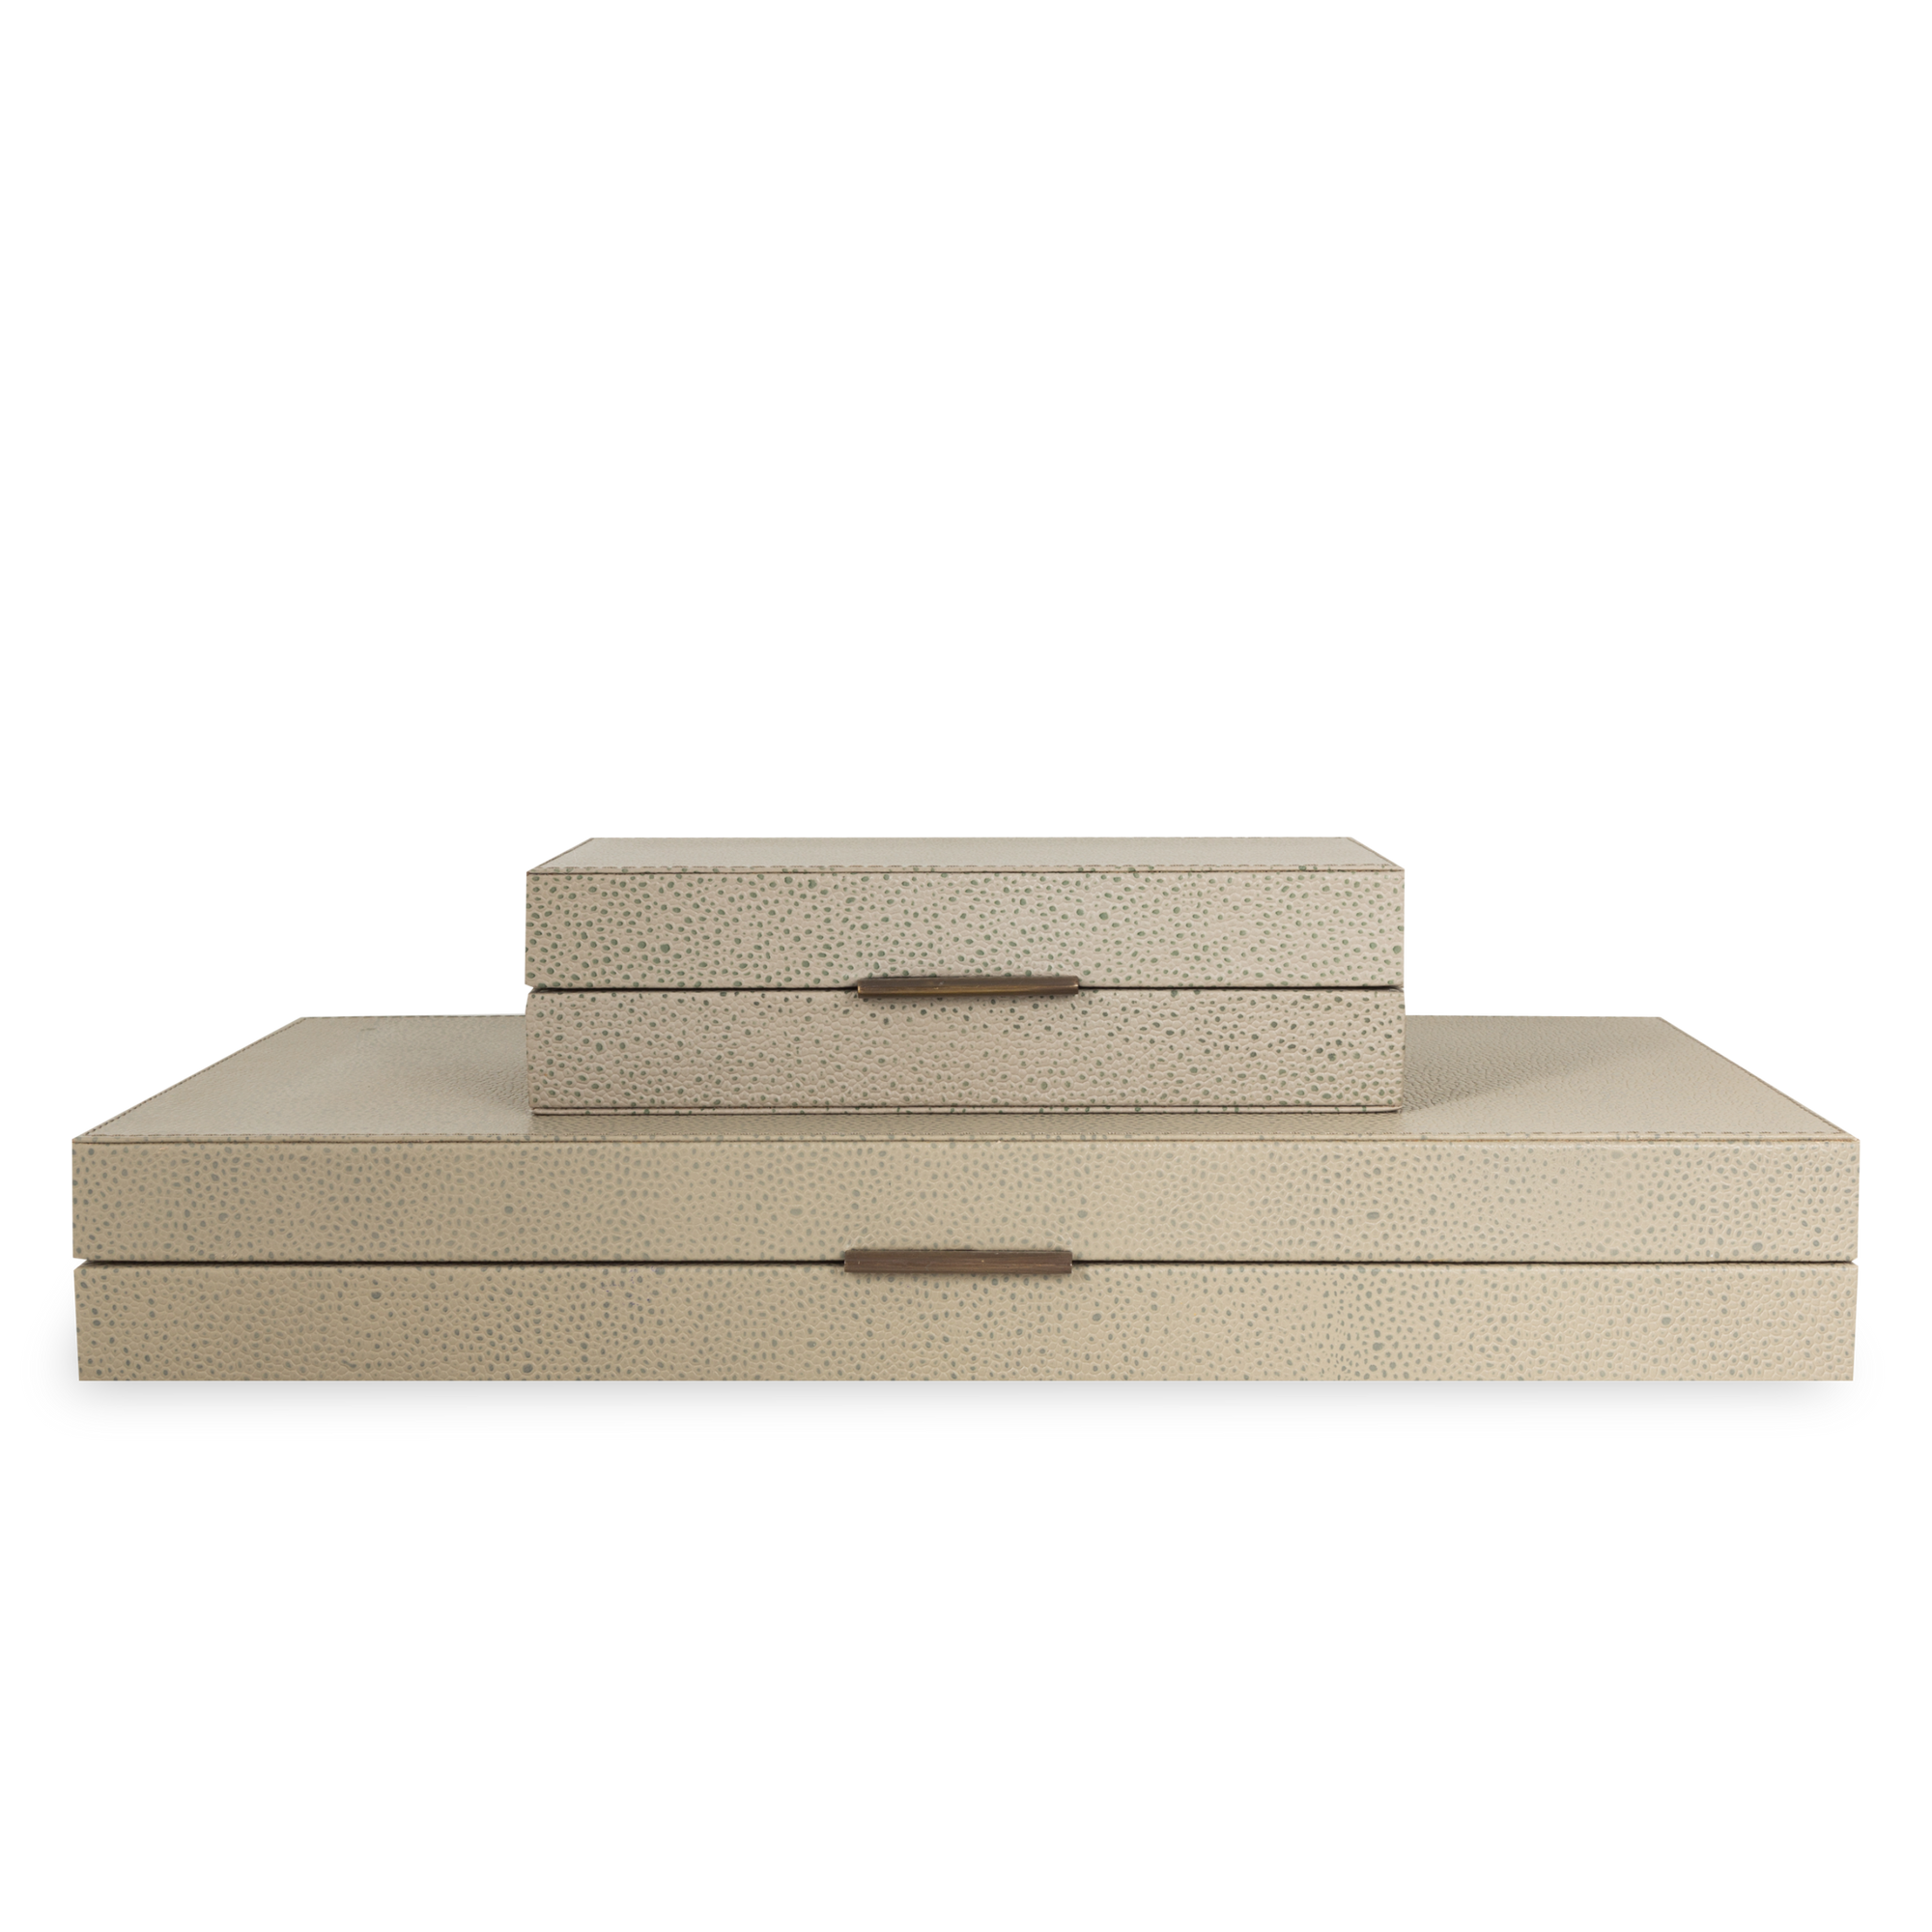 The perfect subtle graining of leather and understated bronze slim knobs provide fantastic complements for the bronze-coloured interior and smooth suede bases of these boxes.